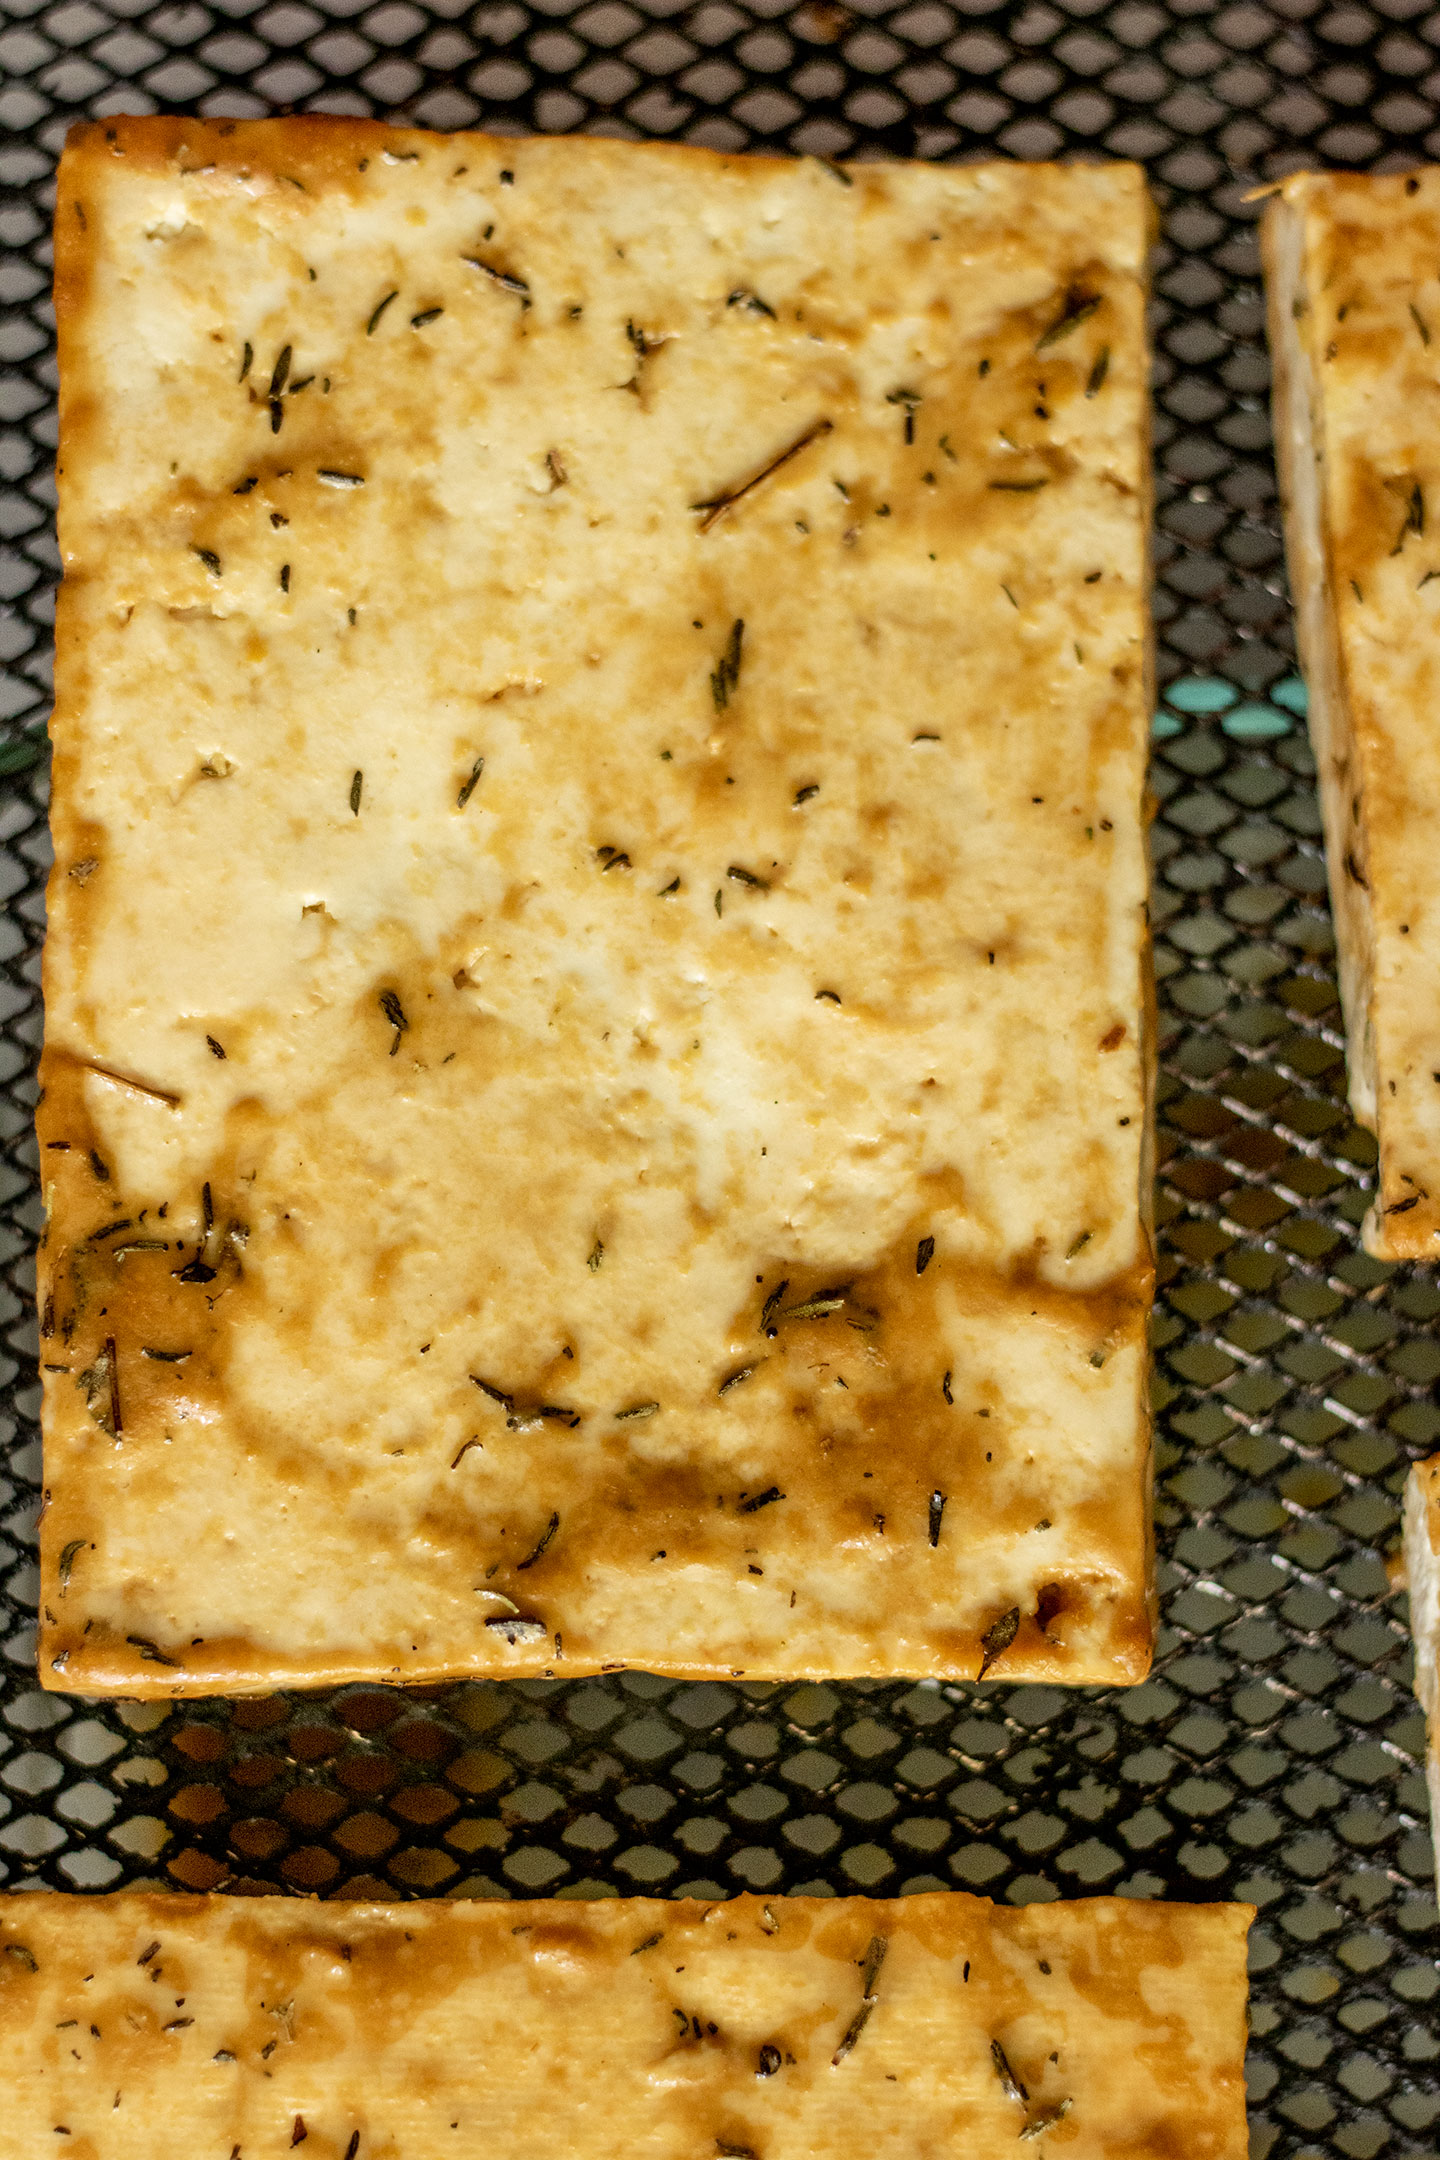 Batter coated tofu placed in an air-fryer basket.